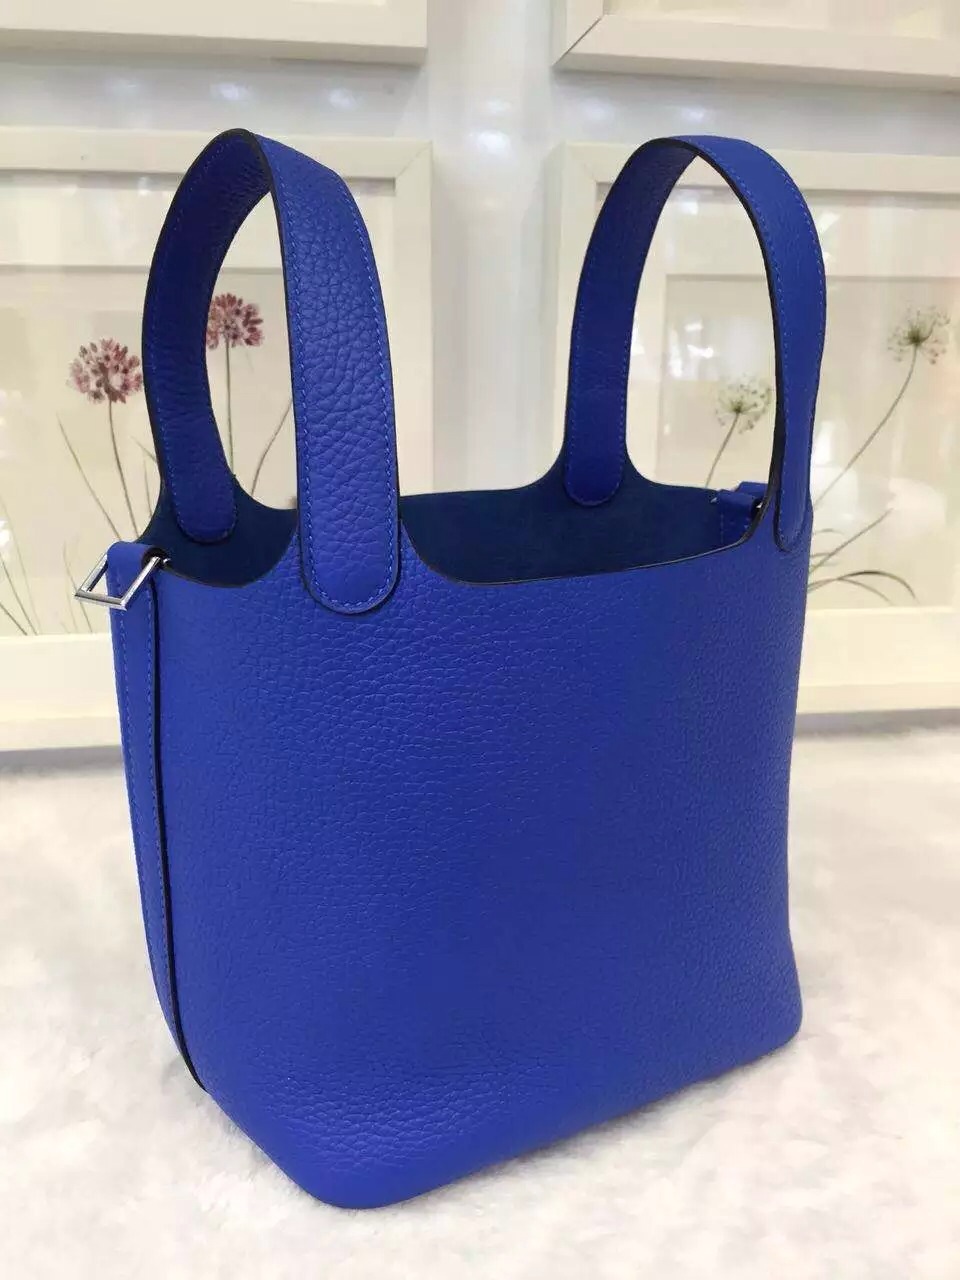 On Sale Hermes France Togo Leather Picotin Lock Bag in T7 Blue Hydra Two Size